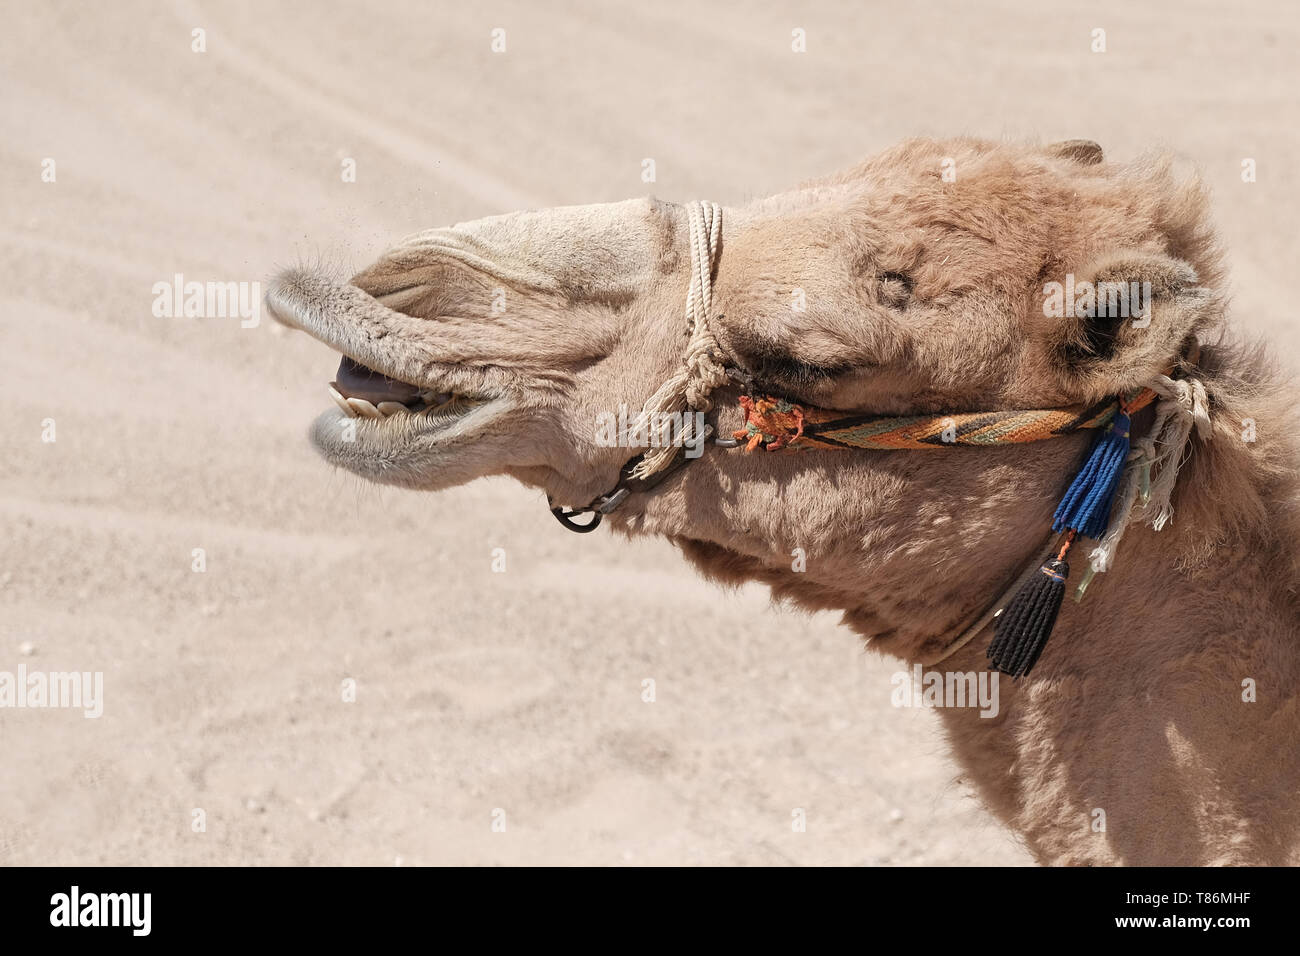 close up of a camel making funny faces Stock Photo